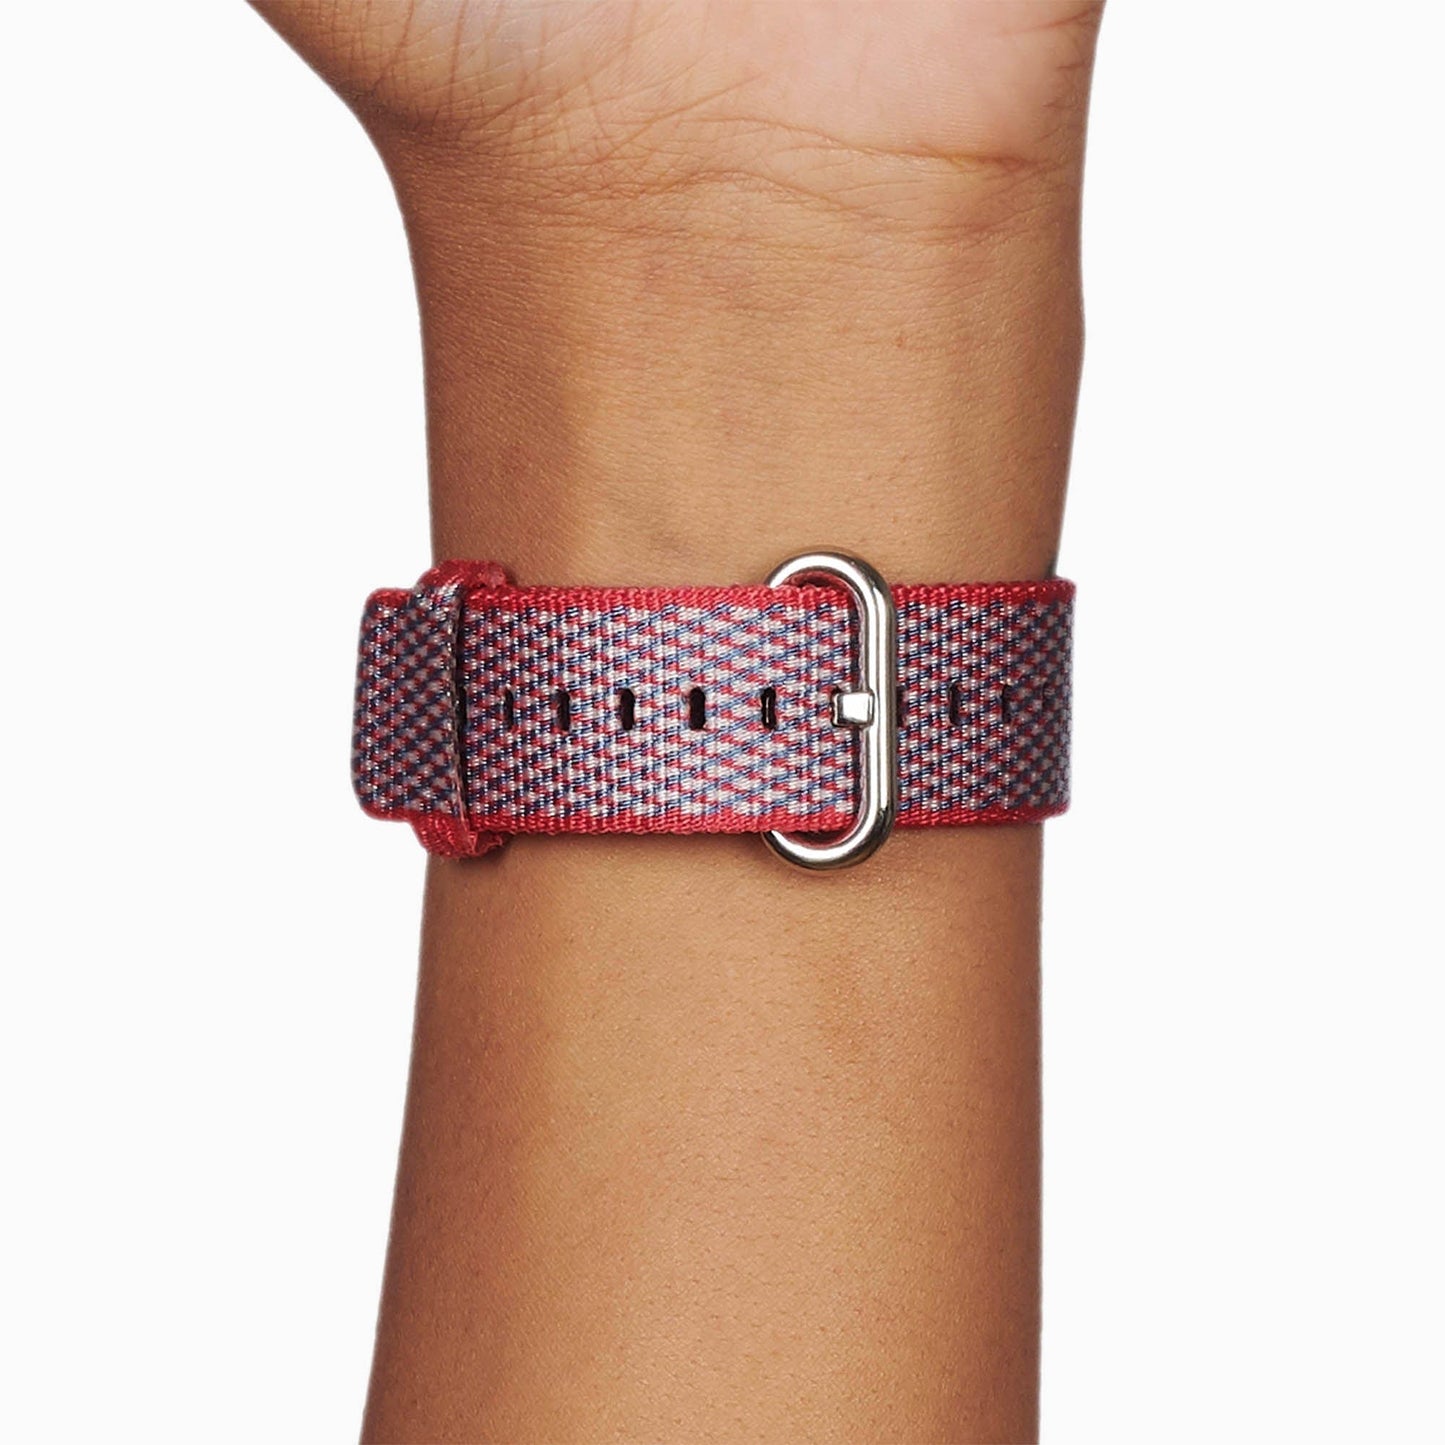 Berry Check Woven Nylon for Apple Watch